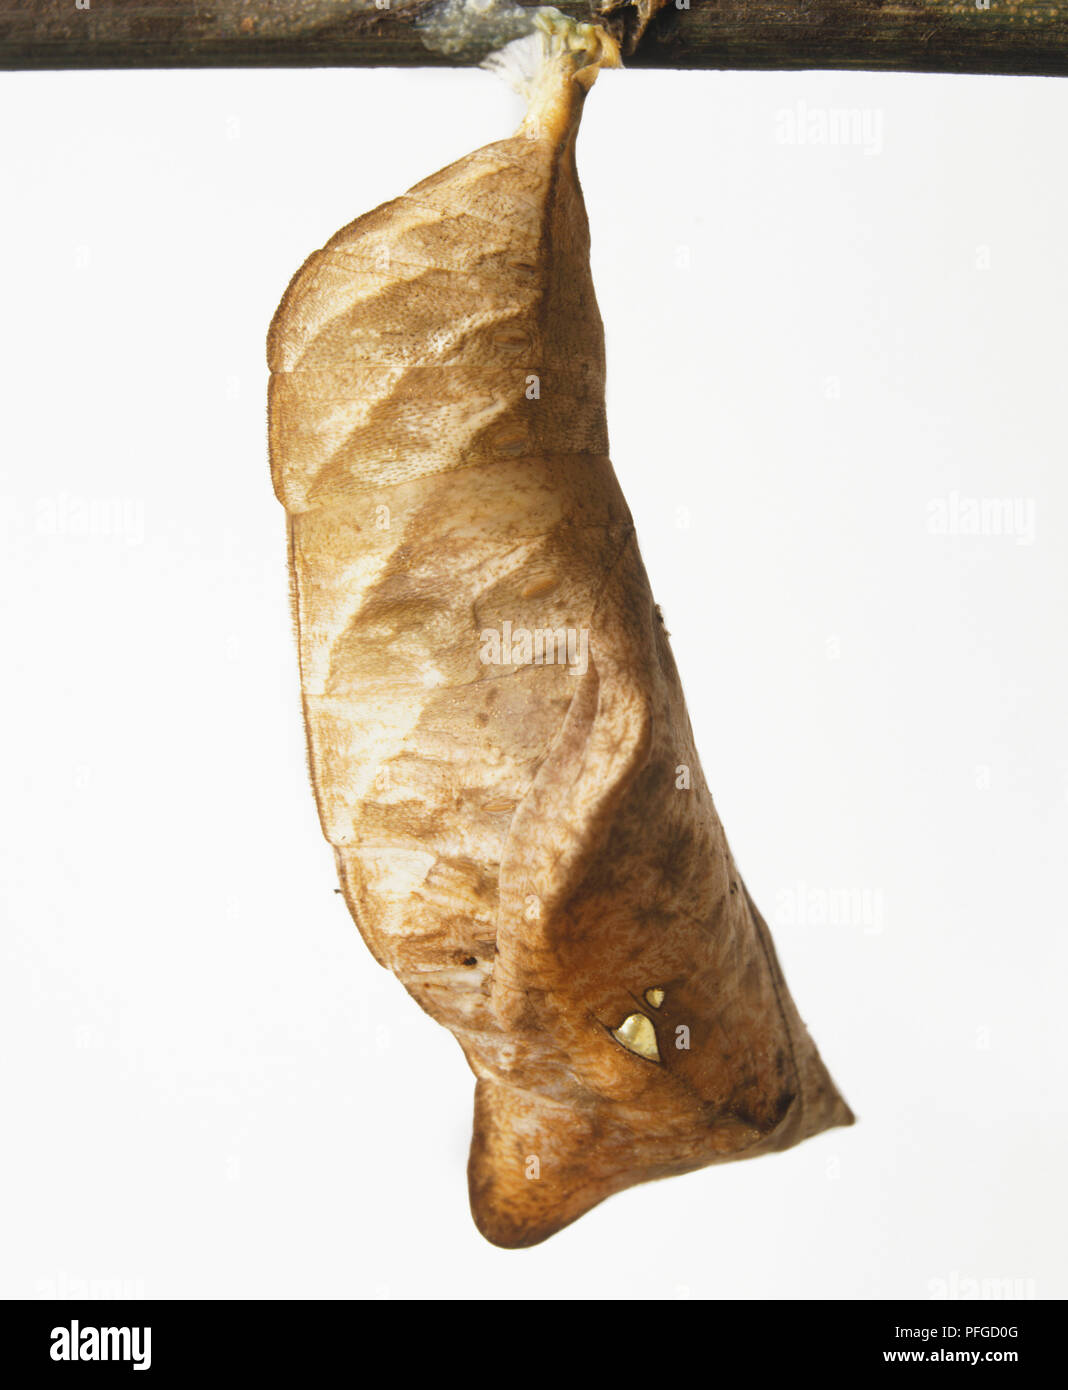 Pupa of butterfly enclosed in cocoon. Stock Photo